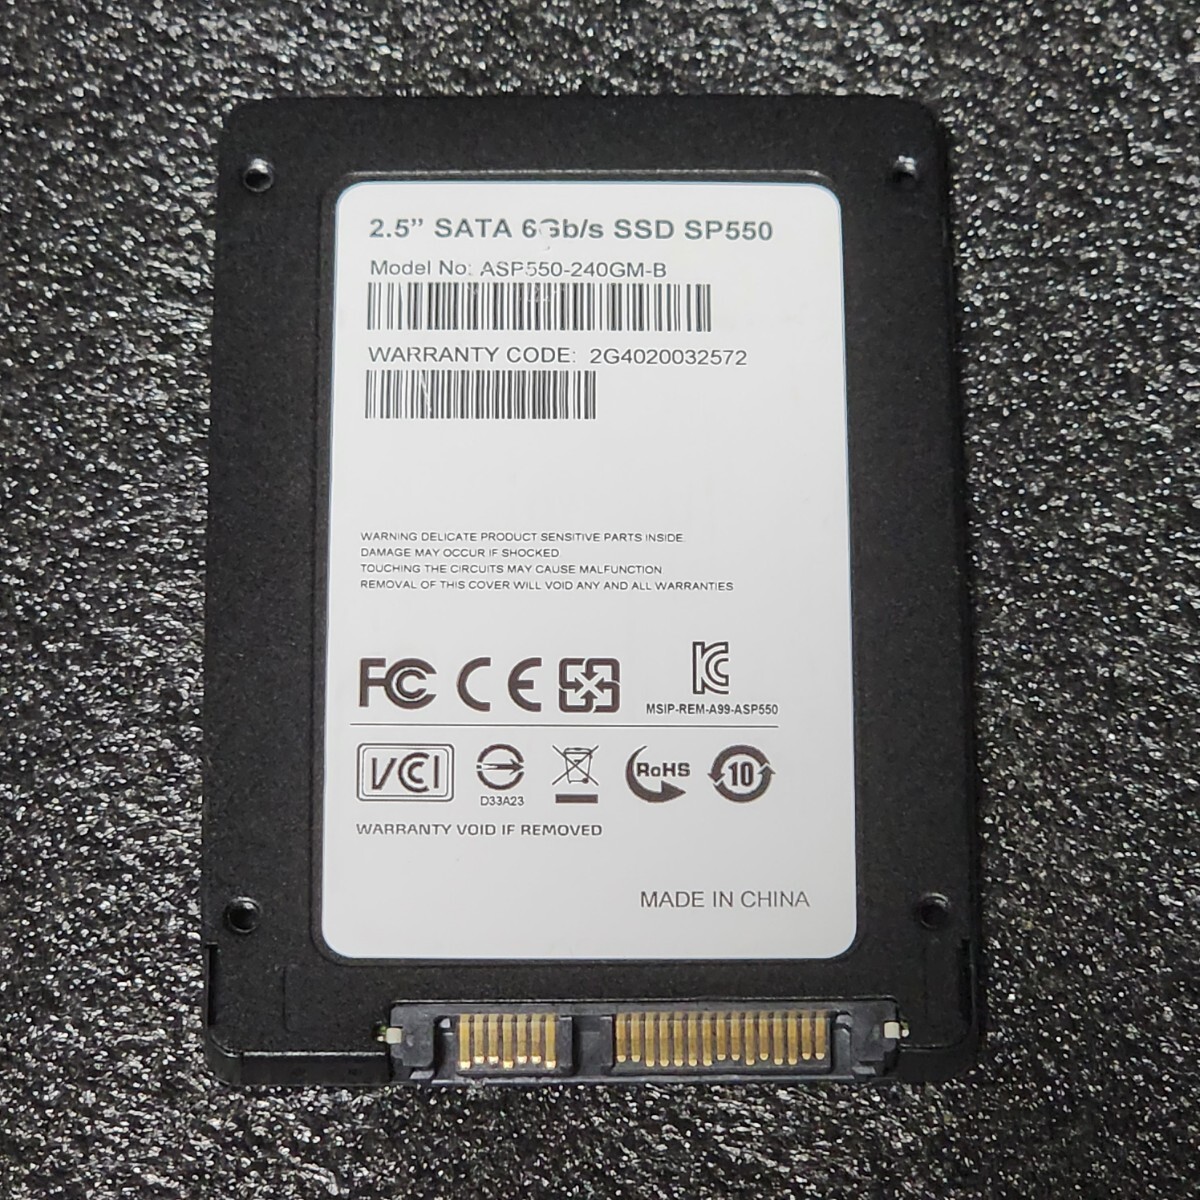 ADATA SP550(ASP550-240GM-B) 240GB SATA SSD normal goods 2.5 -inch built-in SSD format settled PC parts operation verification settled 250GB 256GB